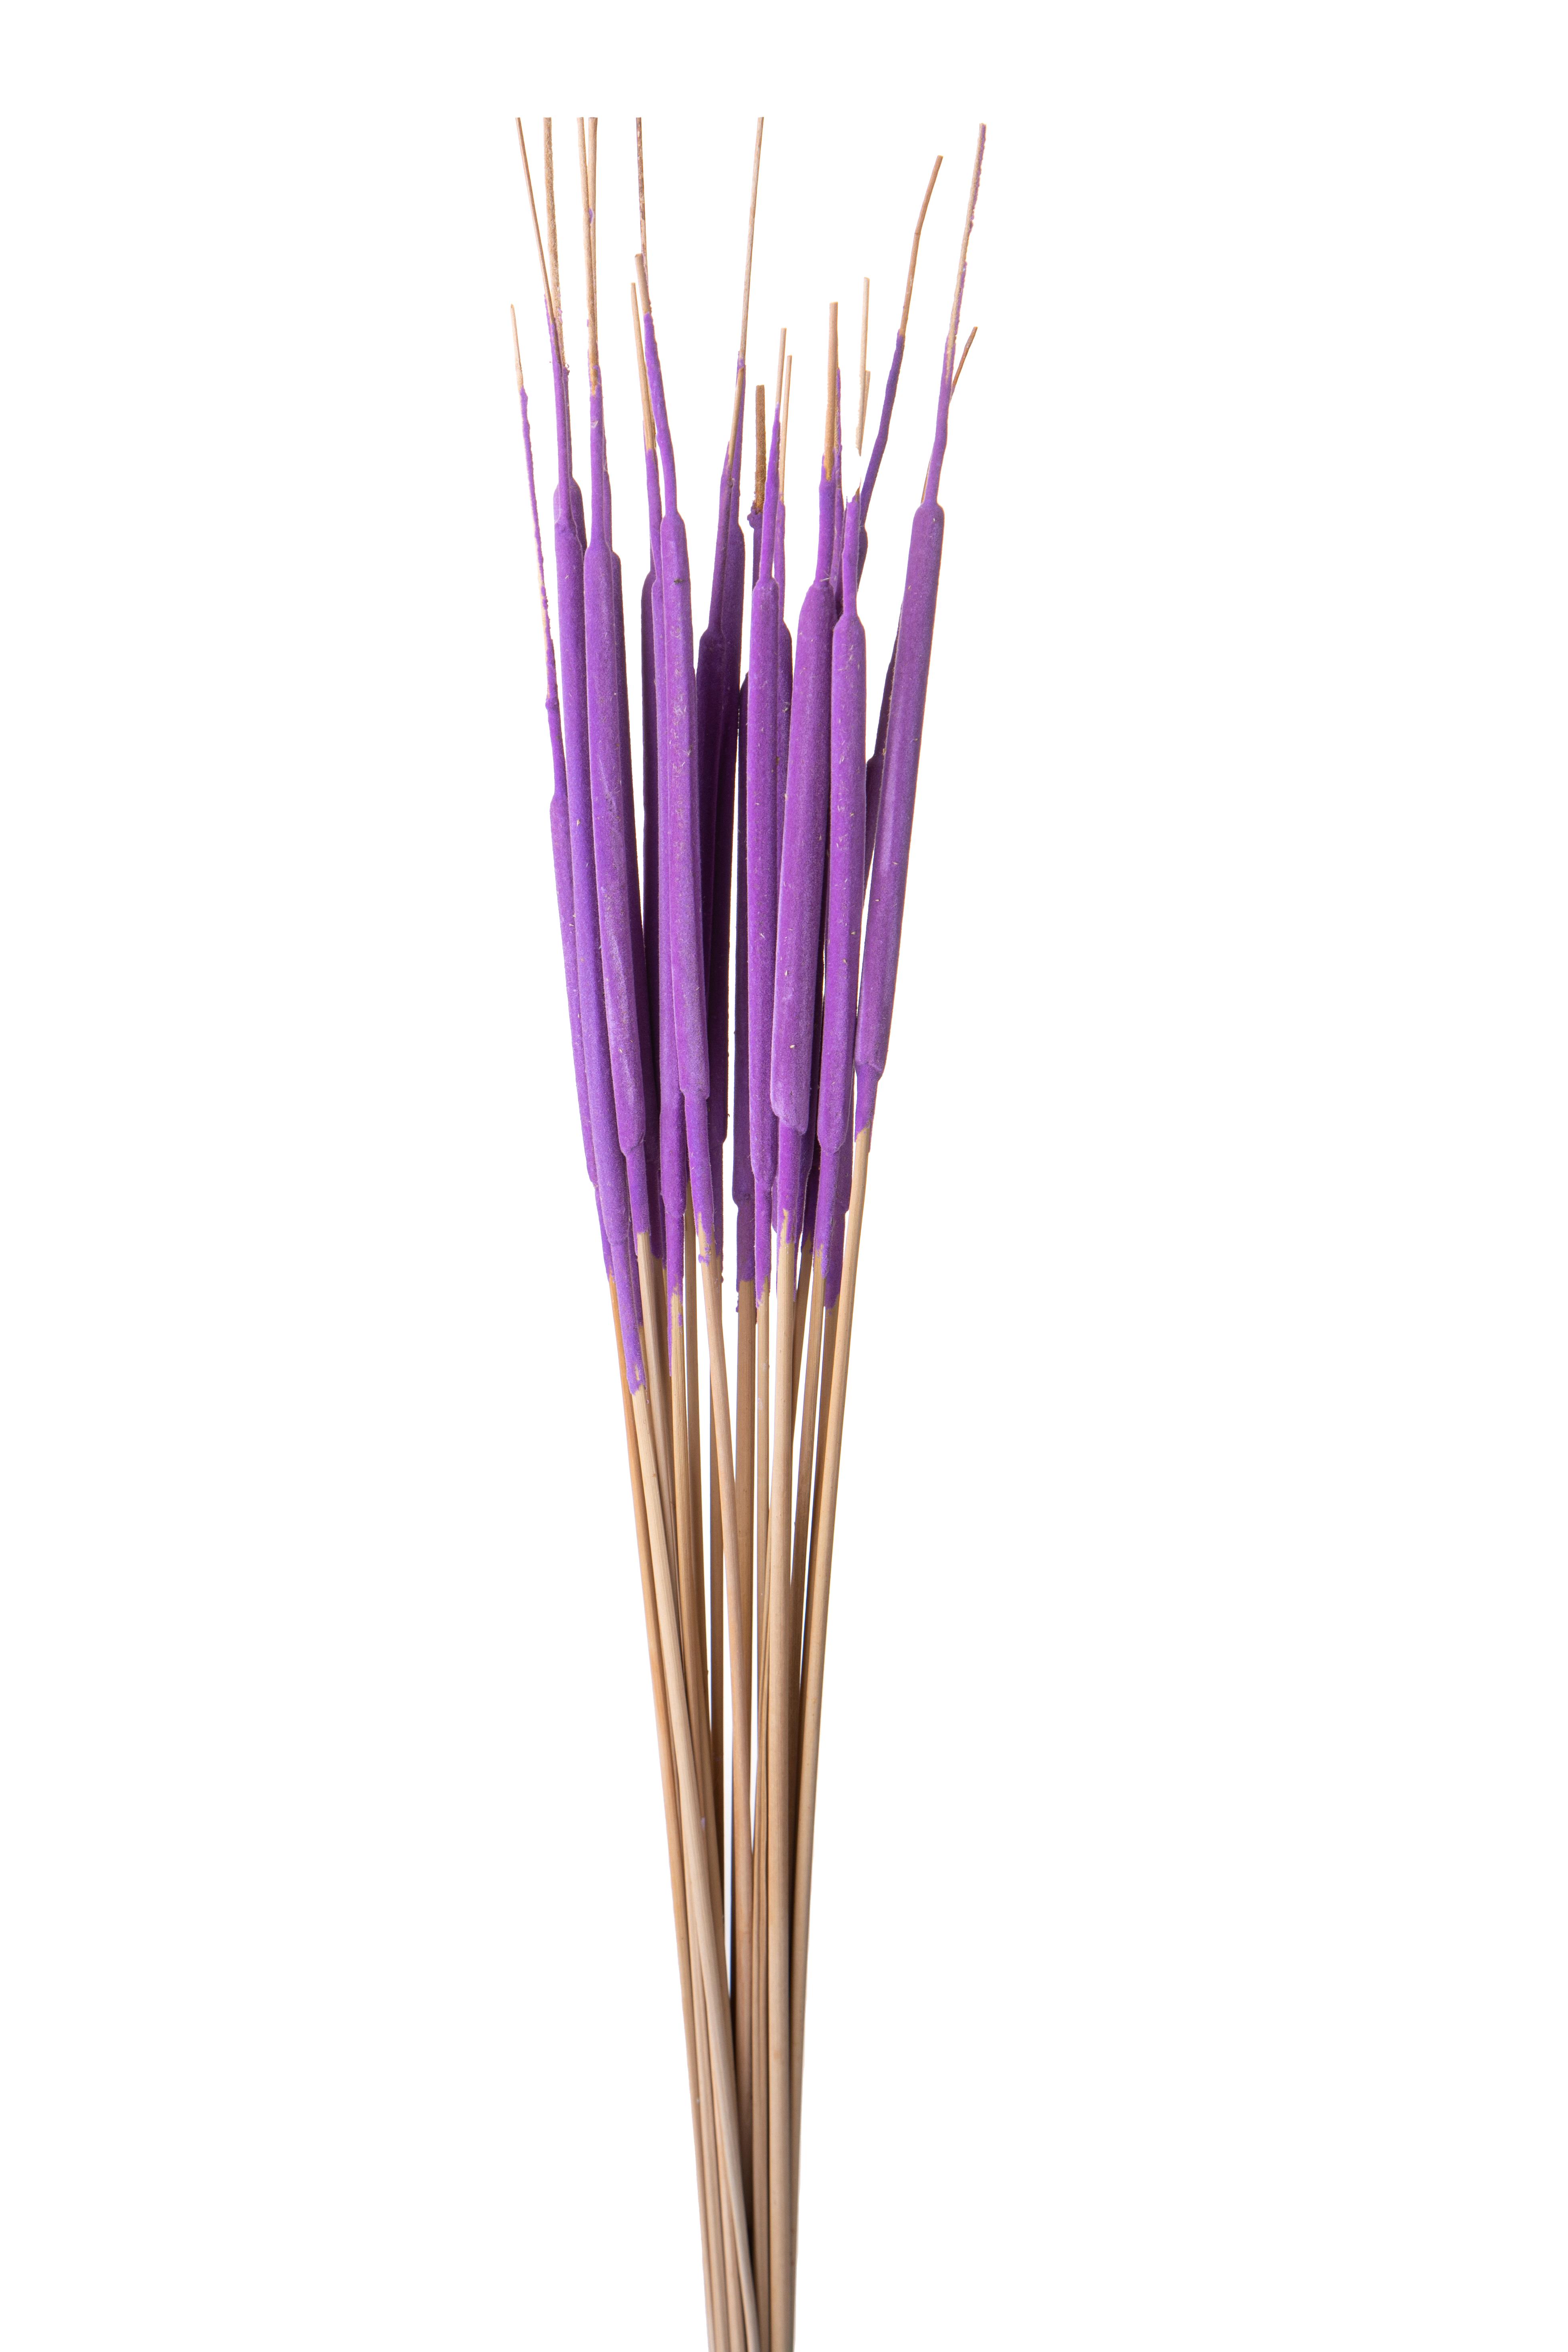 NATURAL PRODUCTS DRIED FLOWERS AND ERBS, COLORED GRASS AND FLOWERS, BIODINI/TYPHA FINE 20 PZ 80 CM